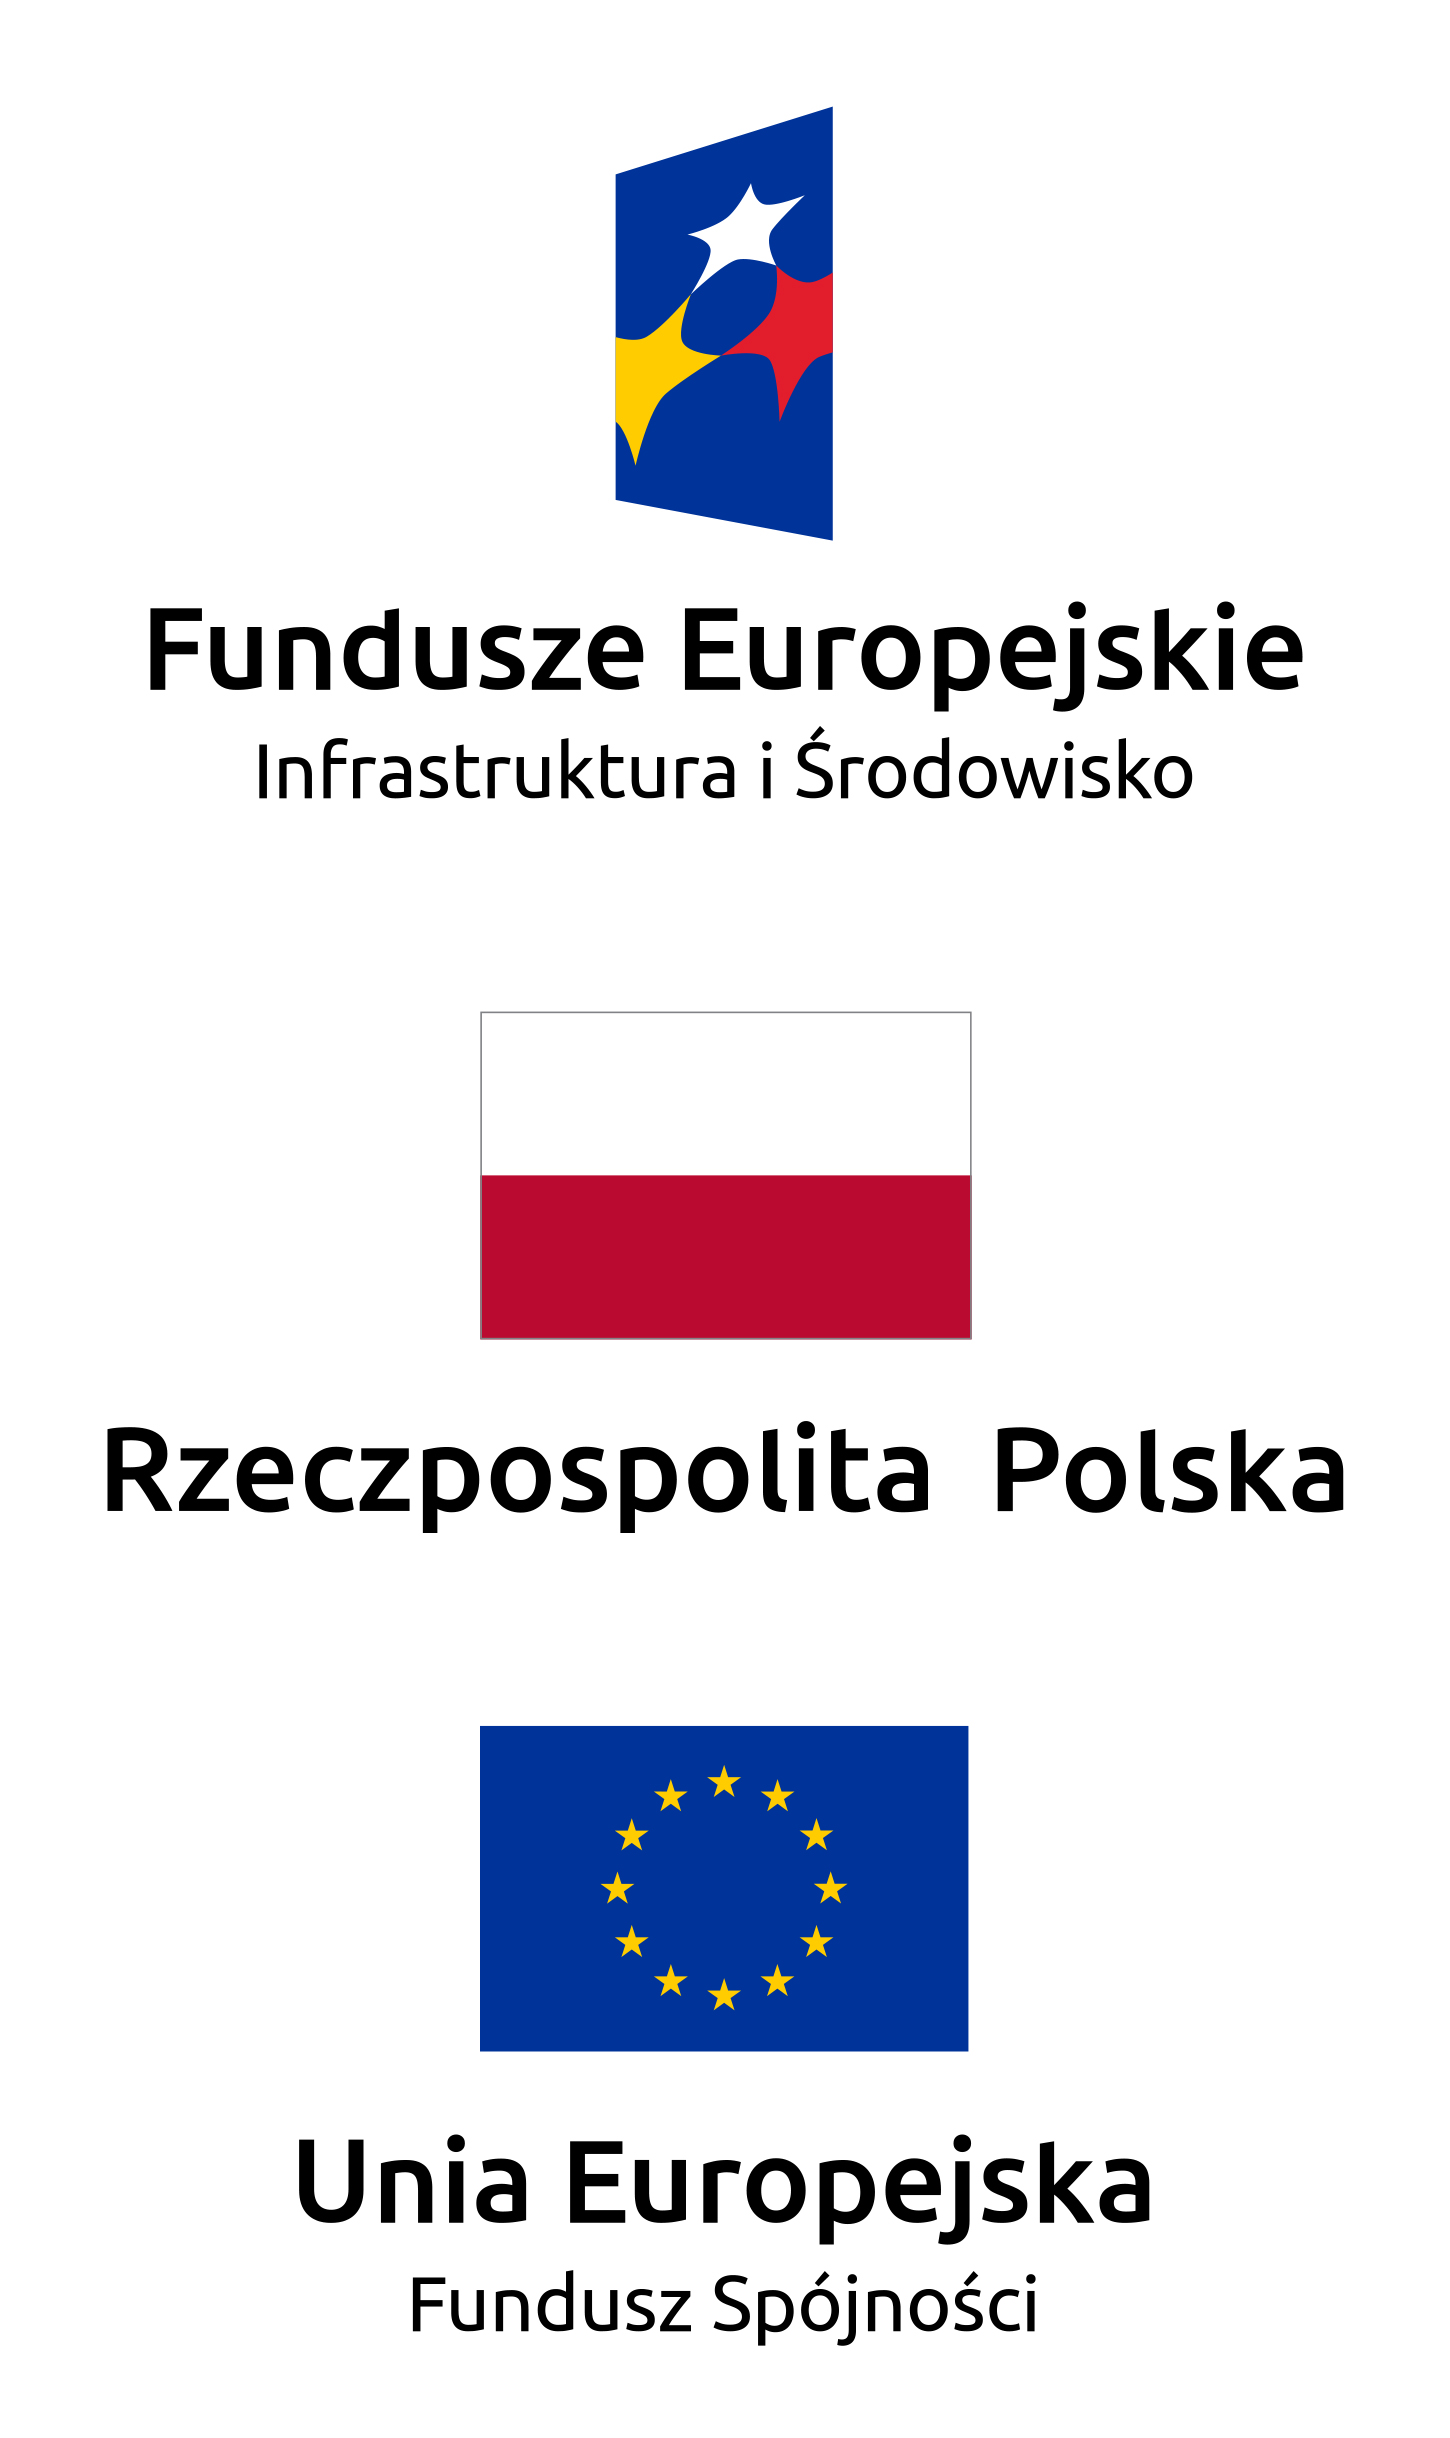 The footer logo of europe